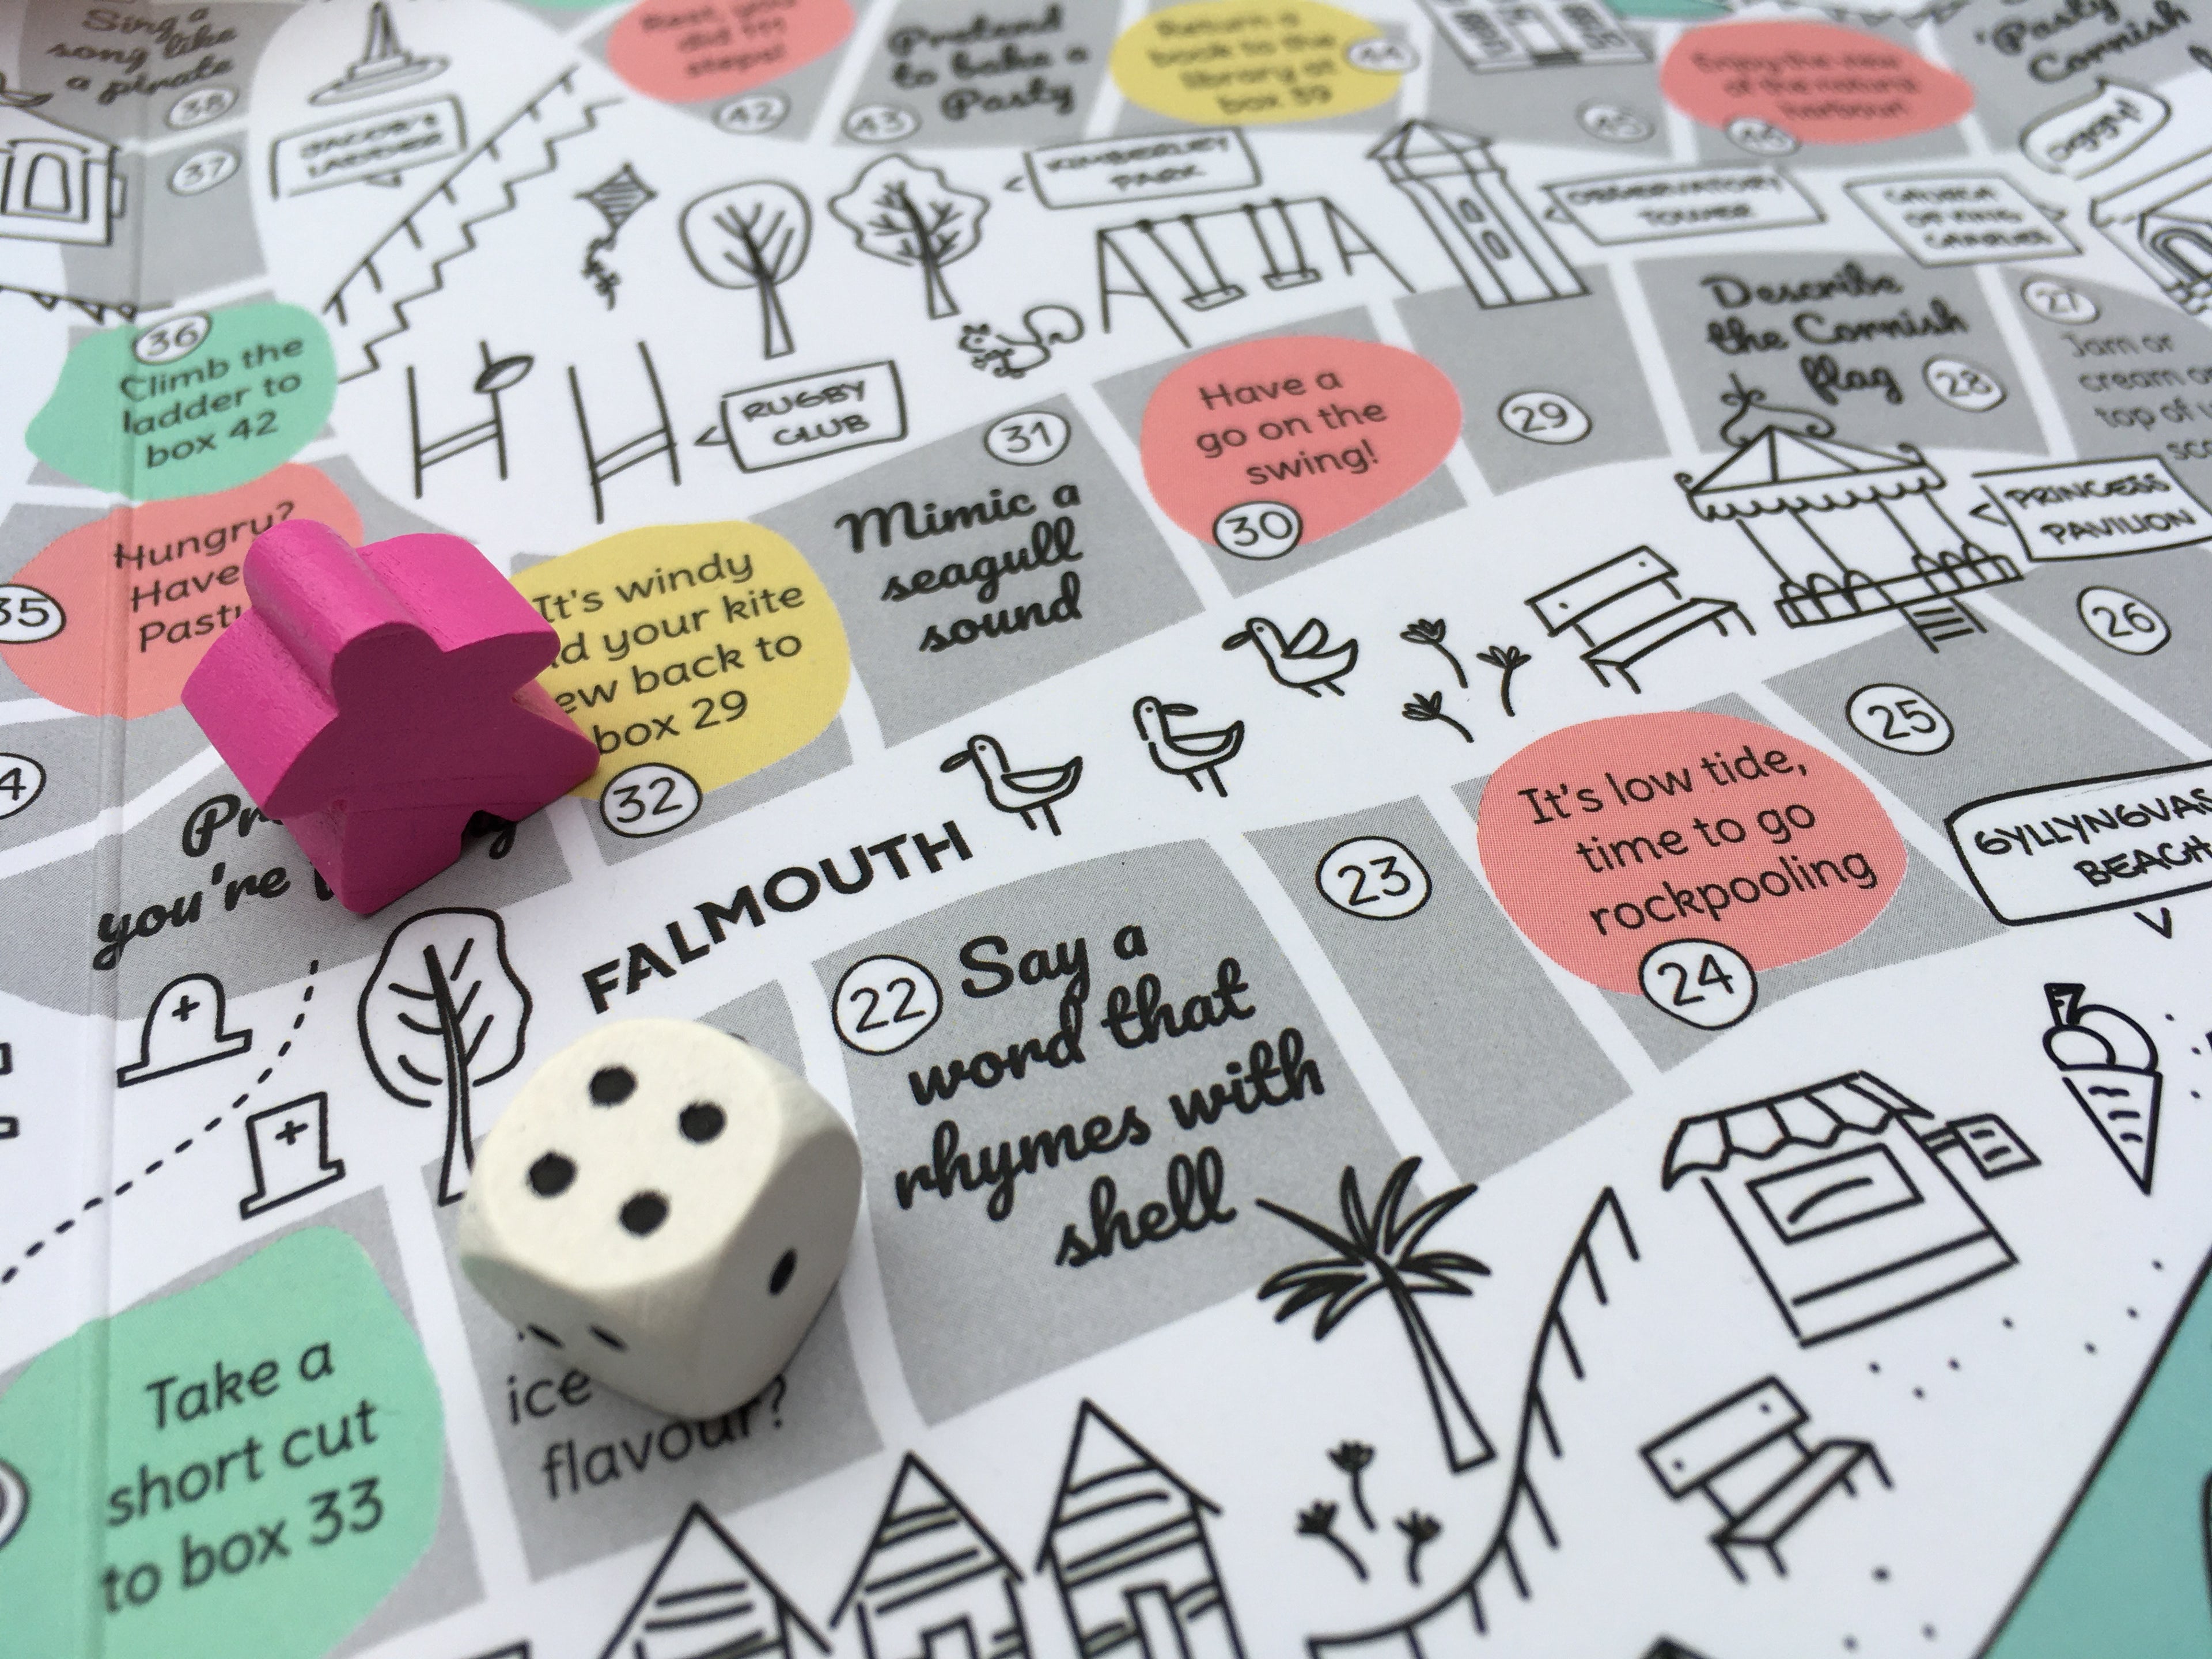 Cornish board game based on the map of Falmouth with wooden dice and marker.